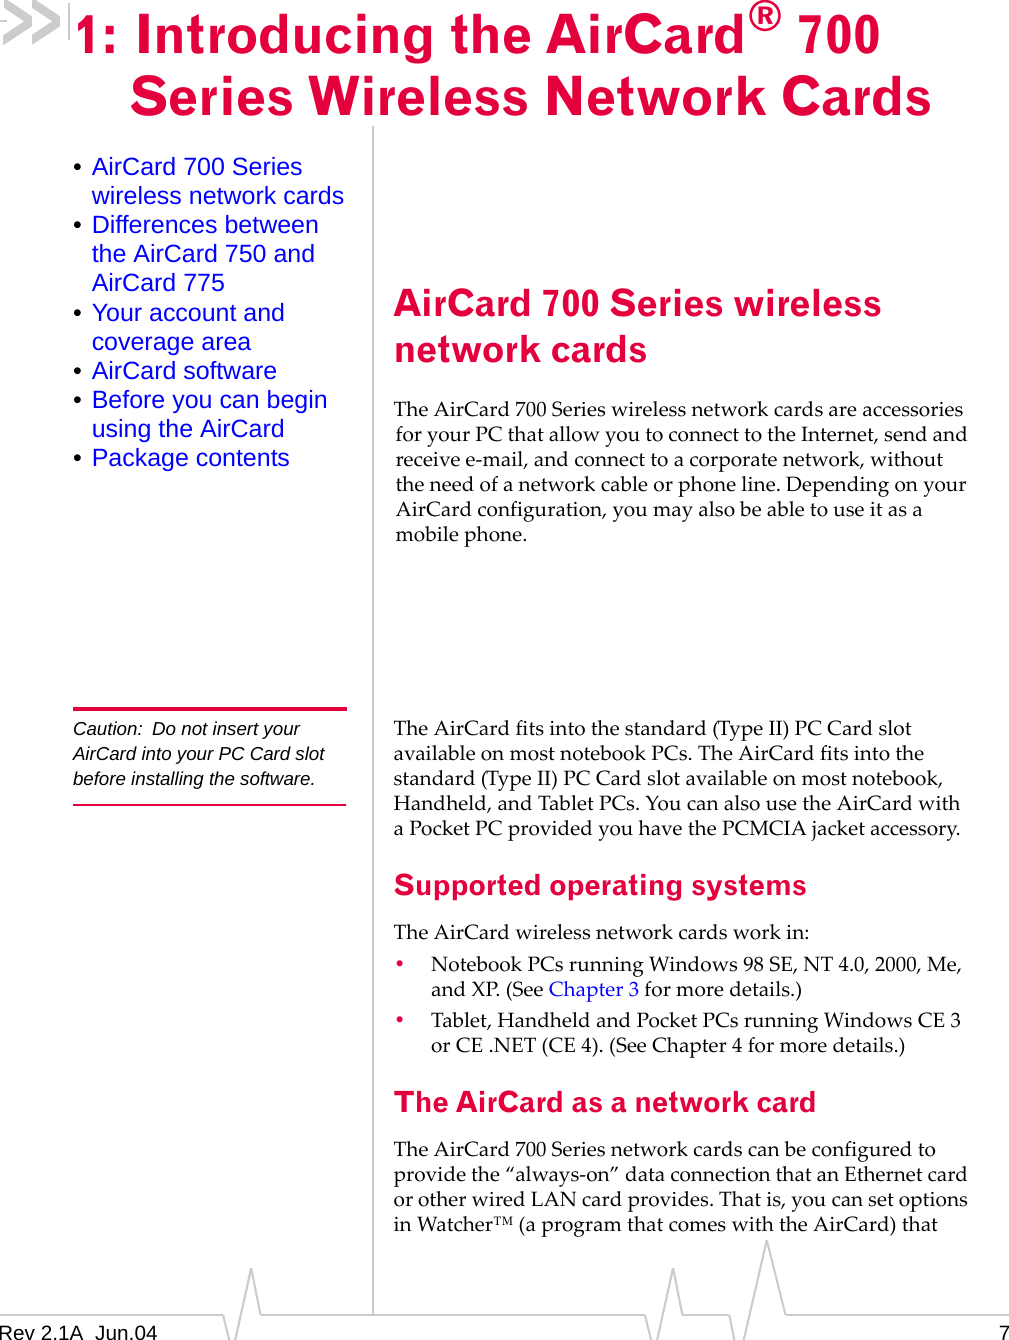 Rev 2.1A  Jun.04 71: Introducing the AirCard®700 Series Wireless Network Cards•AirCard 700 Series wireless network cards•Differences between the AirCard 750 and AirCard 775•Your account and coverage area•AirCard software•Before you can begin using the AirCard•Package contentsAirCard 700 Series wireless network cardsThe AirCard 700 Series wireless network cards are accessories for your PC that allow you to connect to the Internet, send and receive e-mail, and connect to a corporate network, without the need of a network cable or phone line. Depending on your AirCard configuration, you may also be able to use it as a mobile phone.Caution: Do not insert your AirCard into your PC Card slot before installing the software.The AirCard fits into the standard (Type II) PC Card slot available on most notebook PCs. The AirCard fits into the standard (Type II) PC Card slot available on most notebook, Handheld, and Tablet PCs. You can also use the AirCard with a Pocket PC provided you have the PCMCIA jacket accessory.Supported operating systemsThe AirCard wireless network cards work in:•Notebook PCs running Windows 98 SE, NT 4.0, 2000, Me, and XP. (See Chapter 3 for more details.)•Tablet, Handheld and Pocket PCs running Windows CE 3 or CE .NET (CE 4). (See Chapter 4 for more details.)The AirCard as a network cardThe AirCard 700 Series network cards can be configured to provide the “always-on” data connection that an Ethernet card or other wired LAN card provides. That is, you can set options in Watcher™ (a program that comes with the AirCard) that 